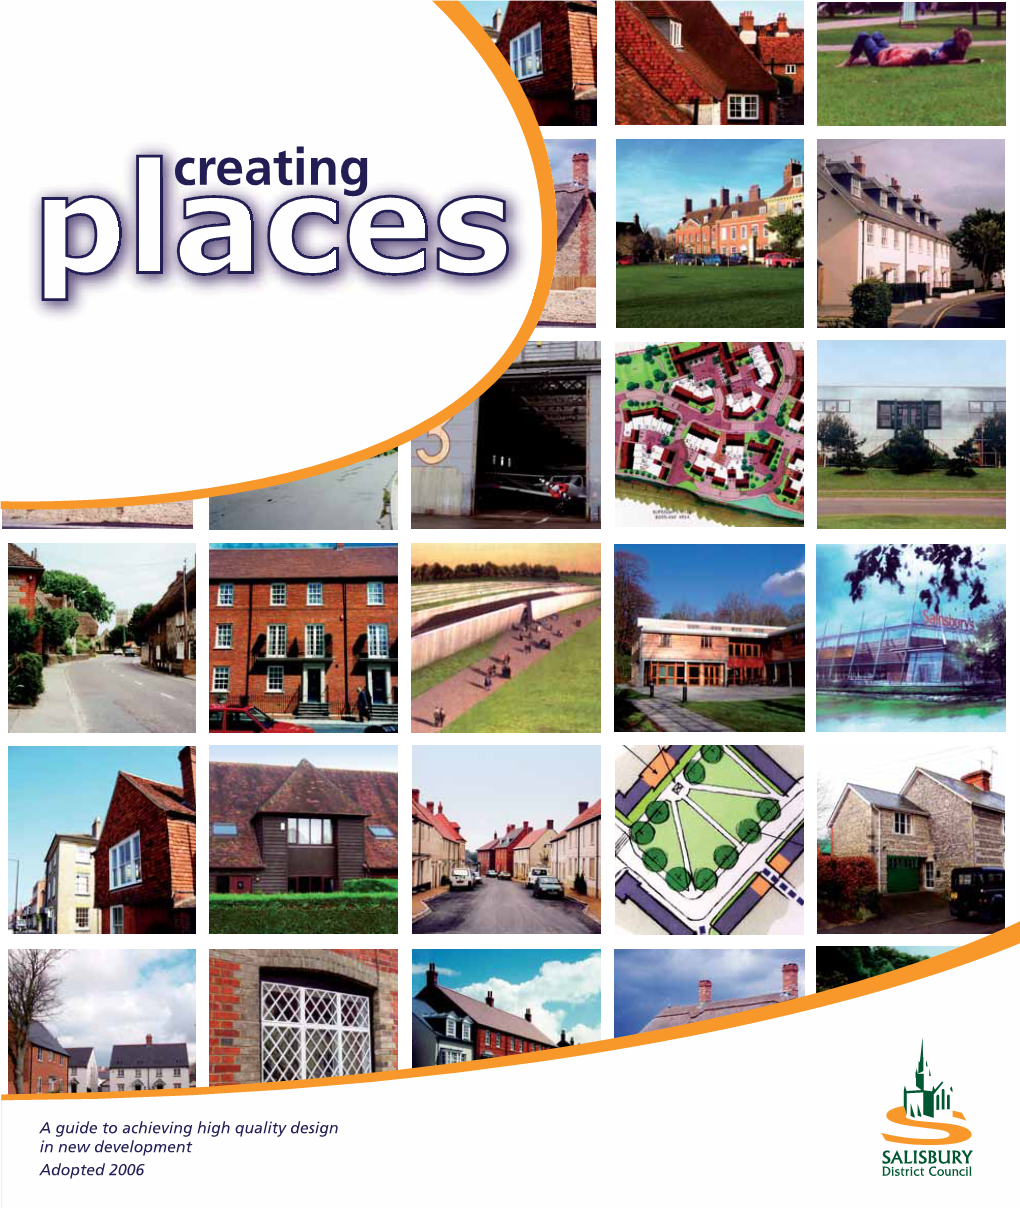 (Adopted April 2006) Creating Places Design Guide